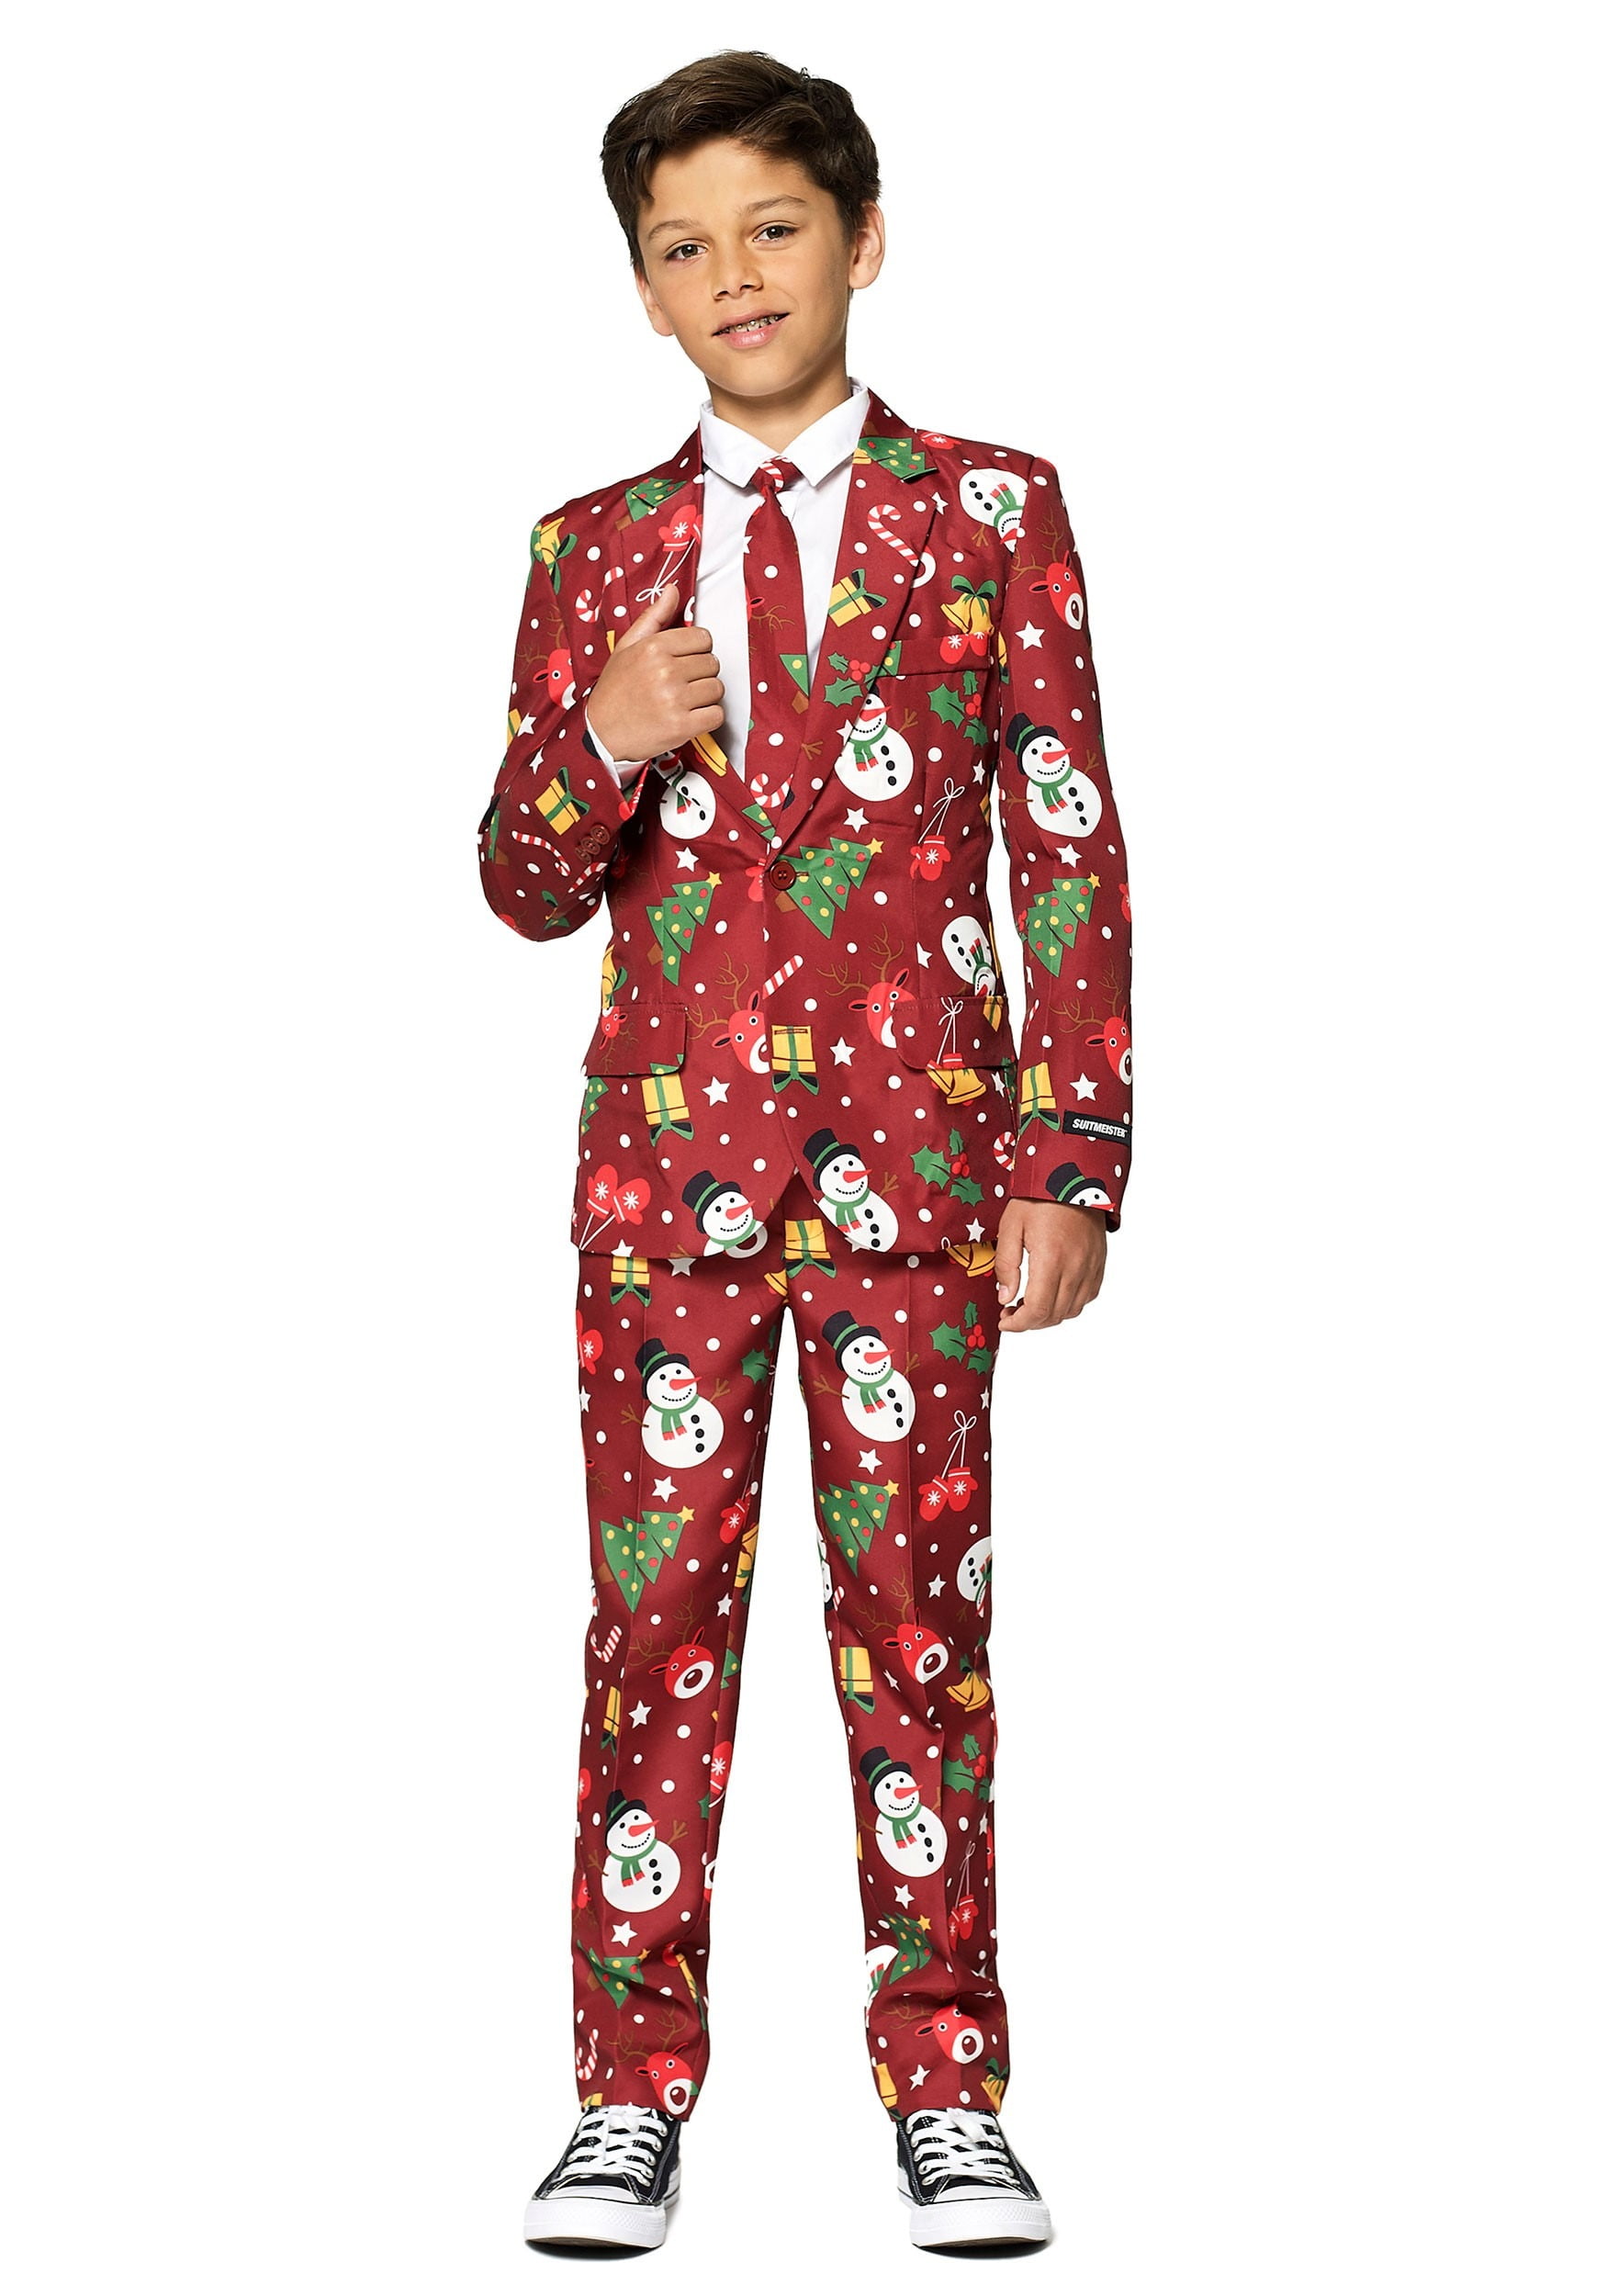 MR ELF ADULT SUIT ROBE XMAS COSTUME FANCY DRESS CHRISTMAS OUTFIT SETS 